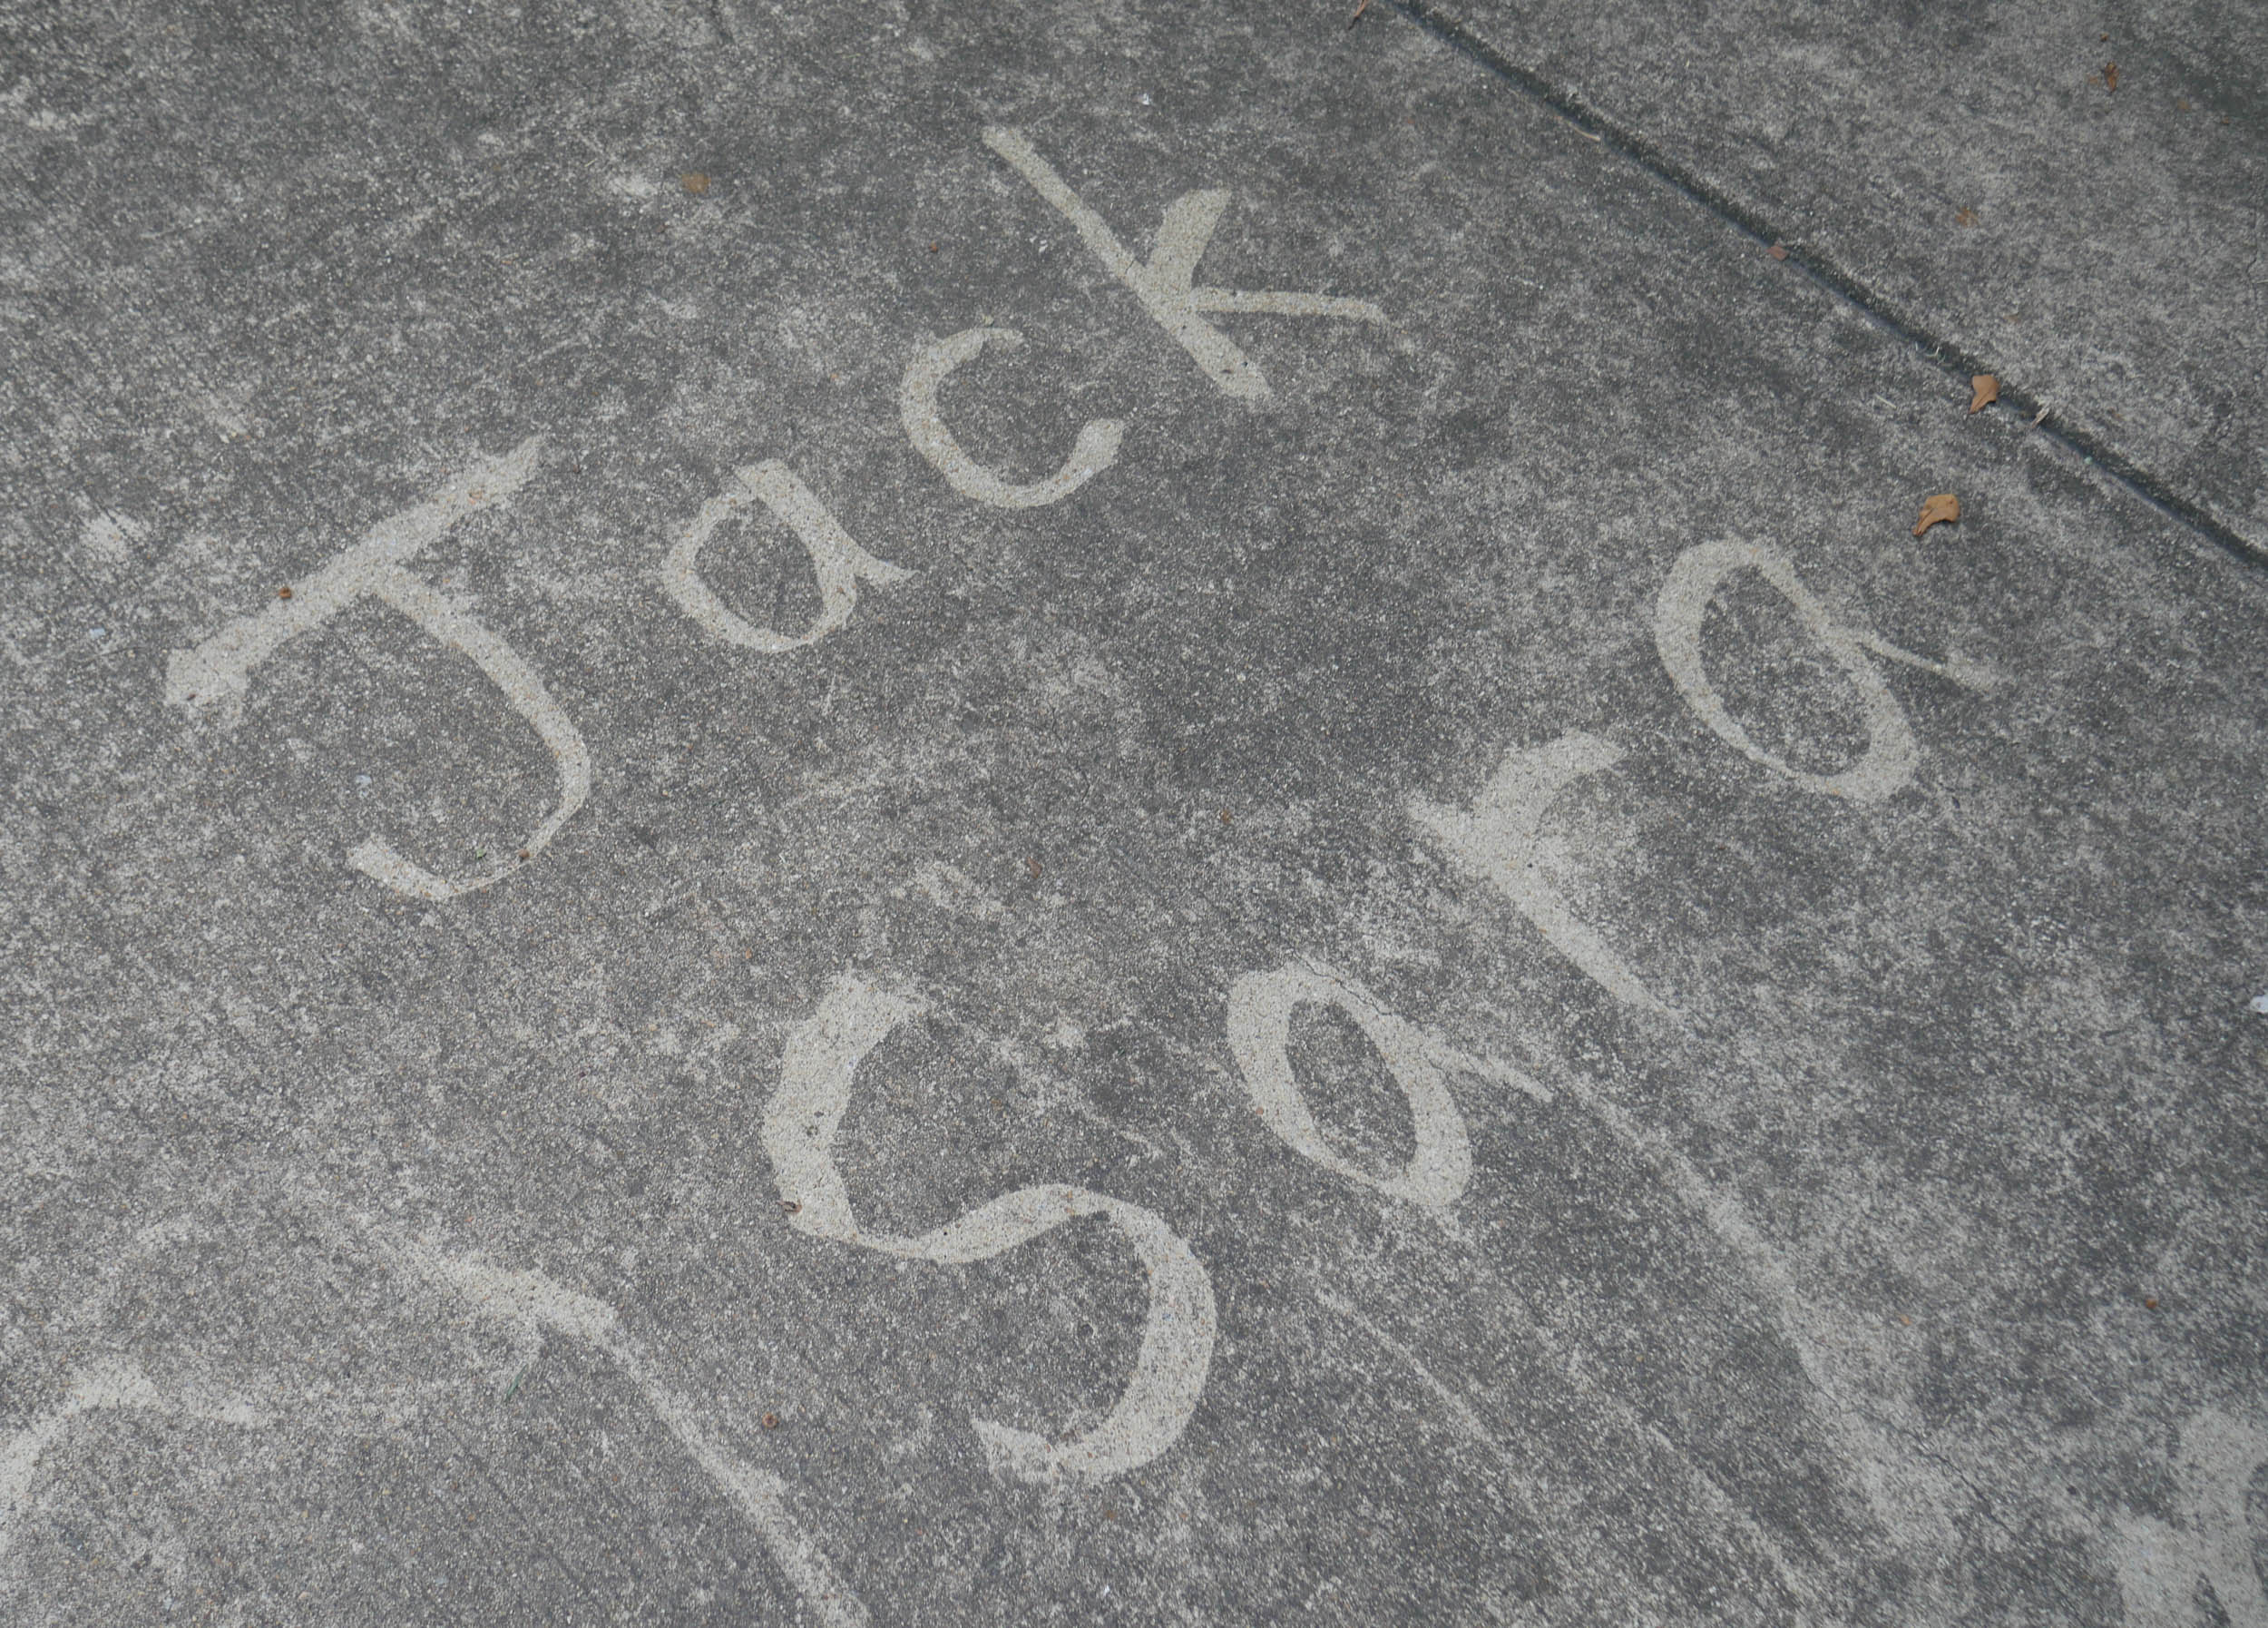 The names “Jack” and “Sara” written on a concrete driveway with a pressure washer.